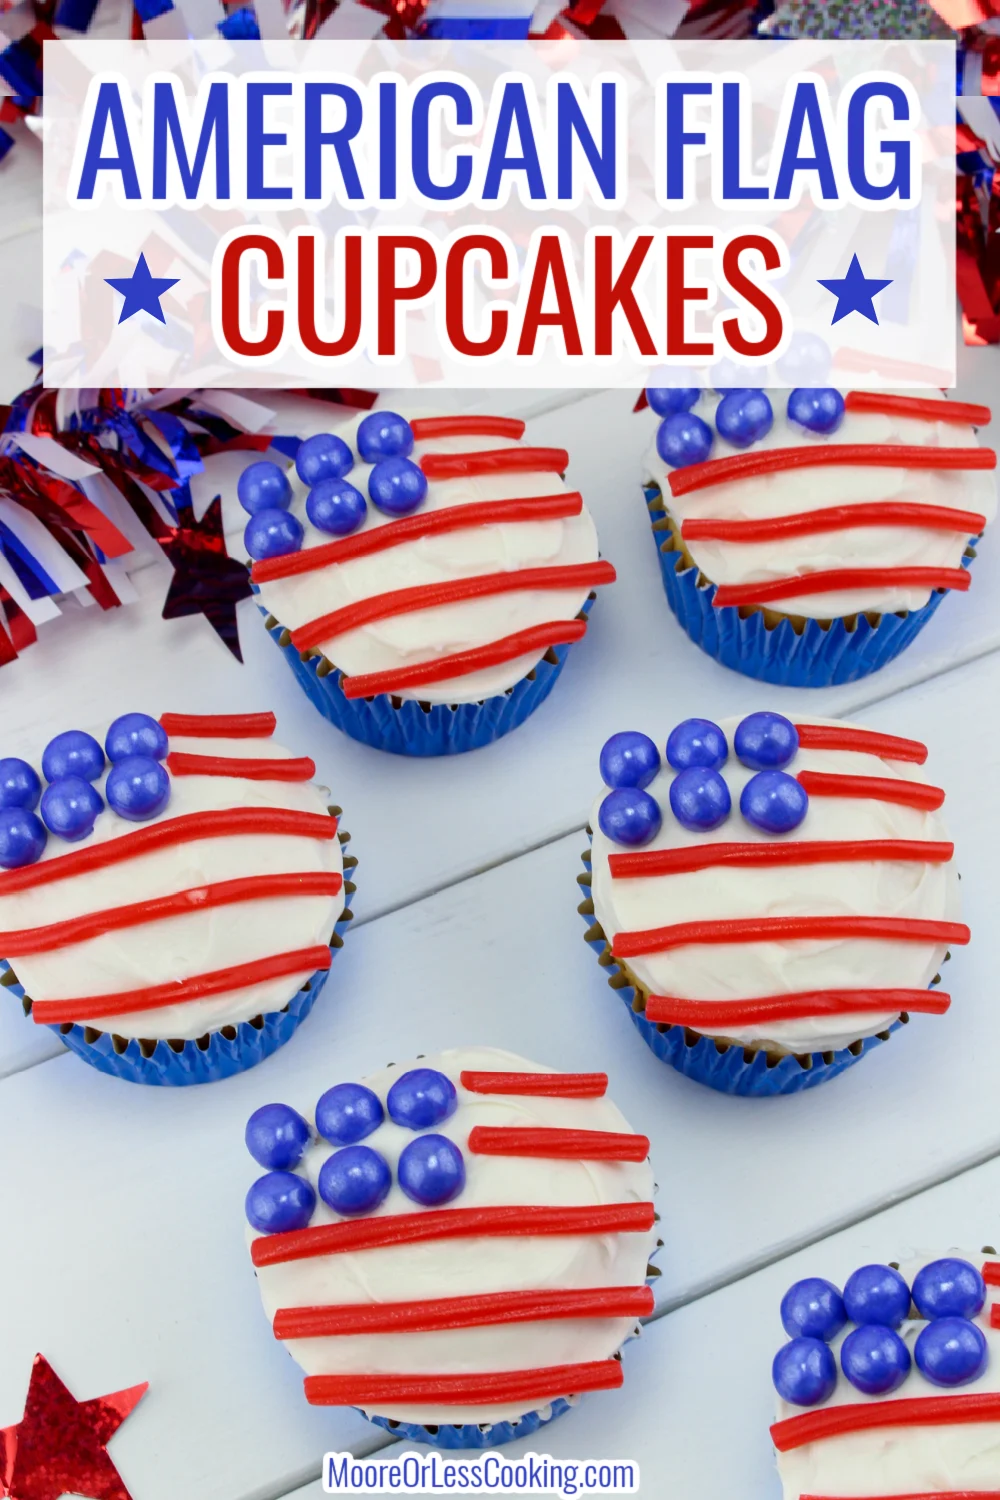 Keep it patriotic this summer with these American Flag Cupcakes that are perfect for the 4th of July, Flag Day or Memorial Day. They're an easy red, white and blue dessert that you can decorate in just minutes! via @Mooreorlesscook